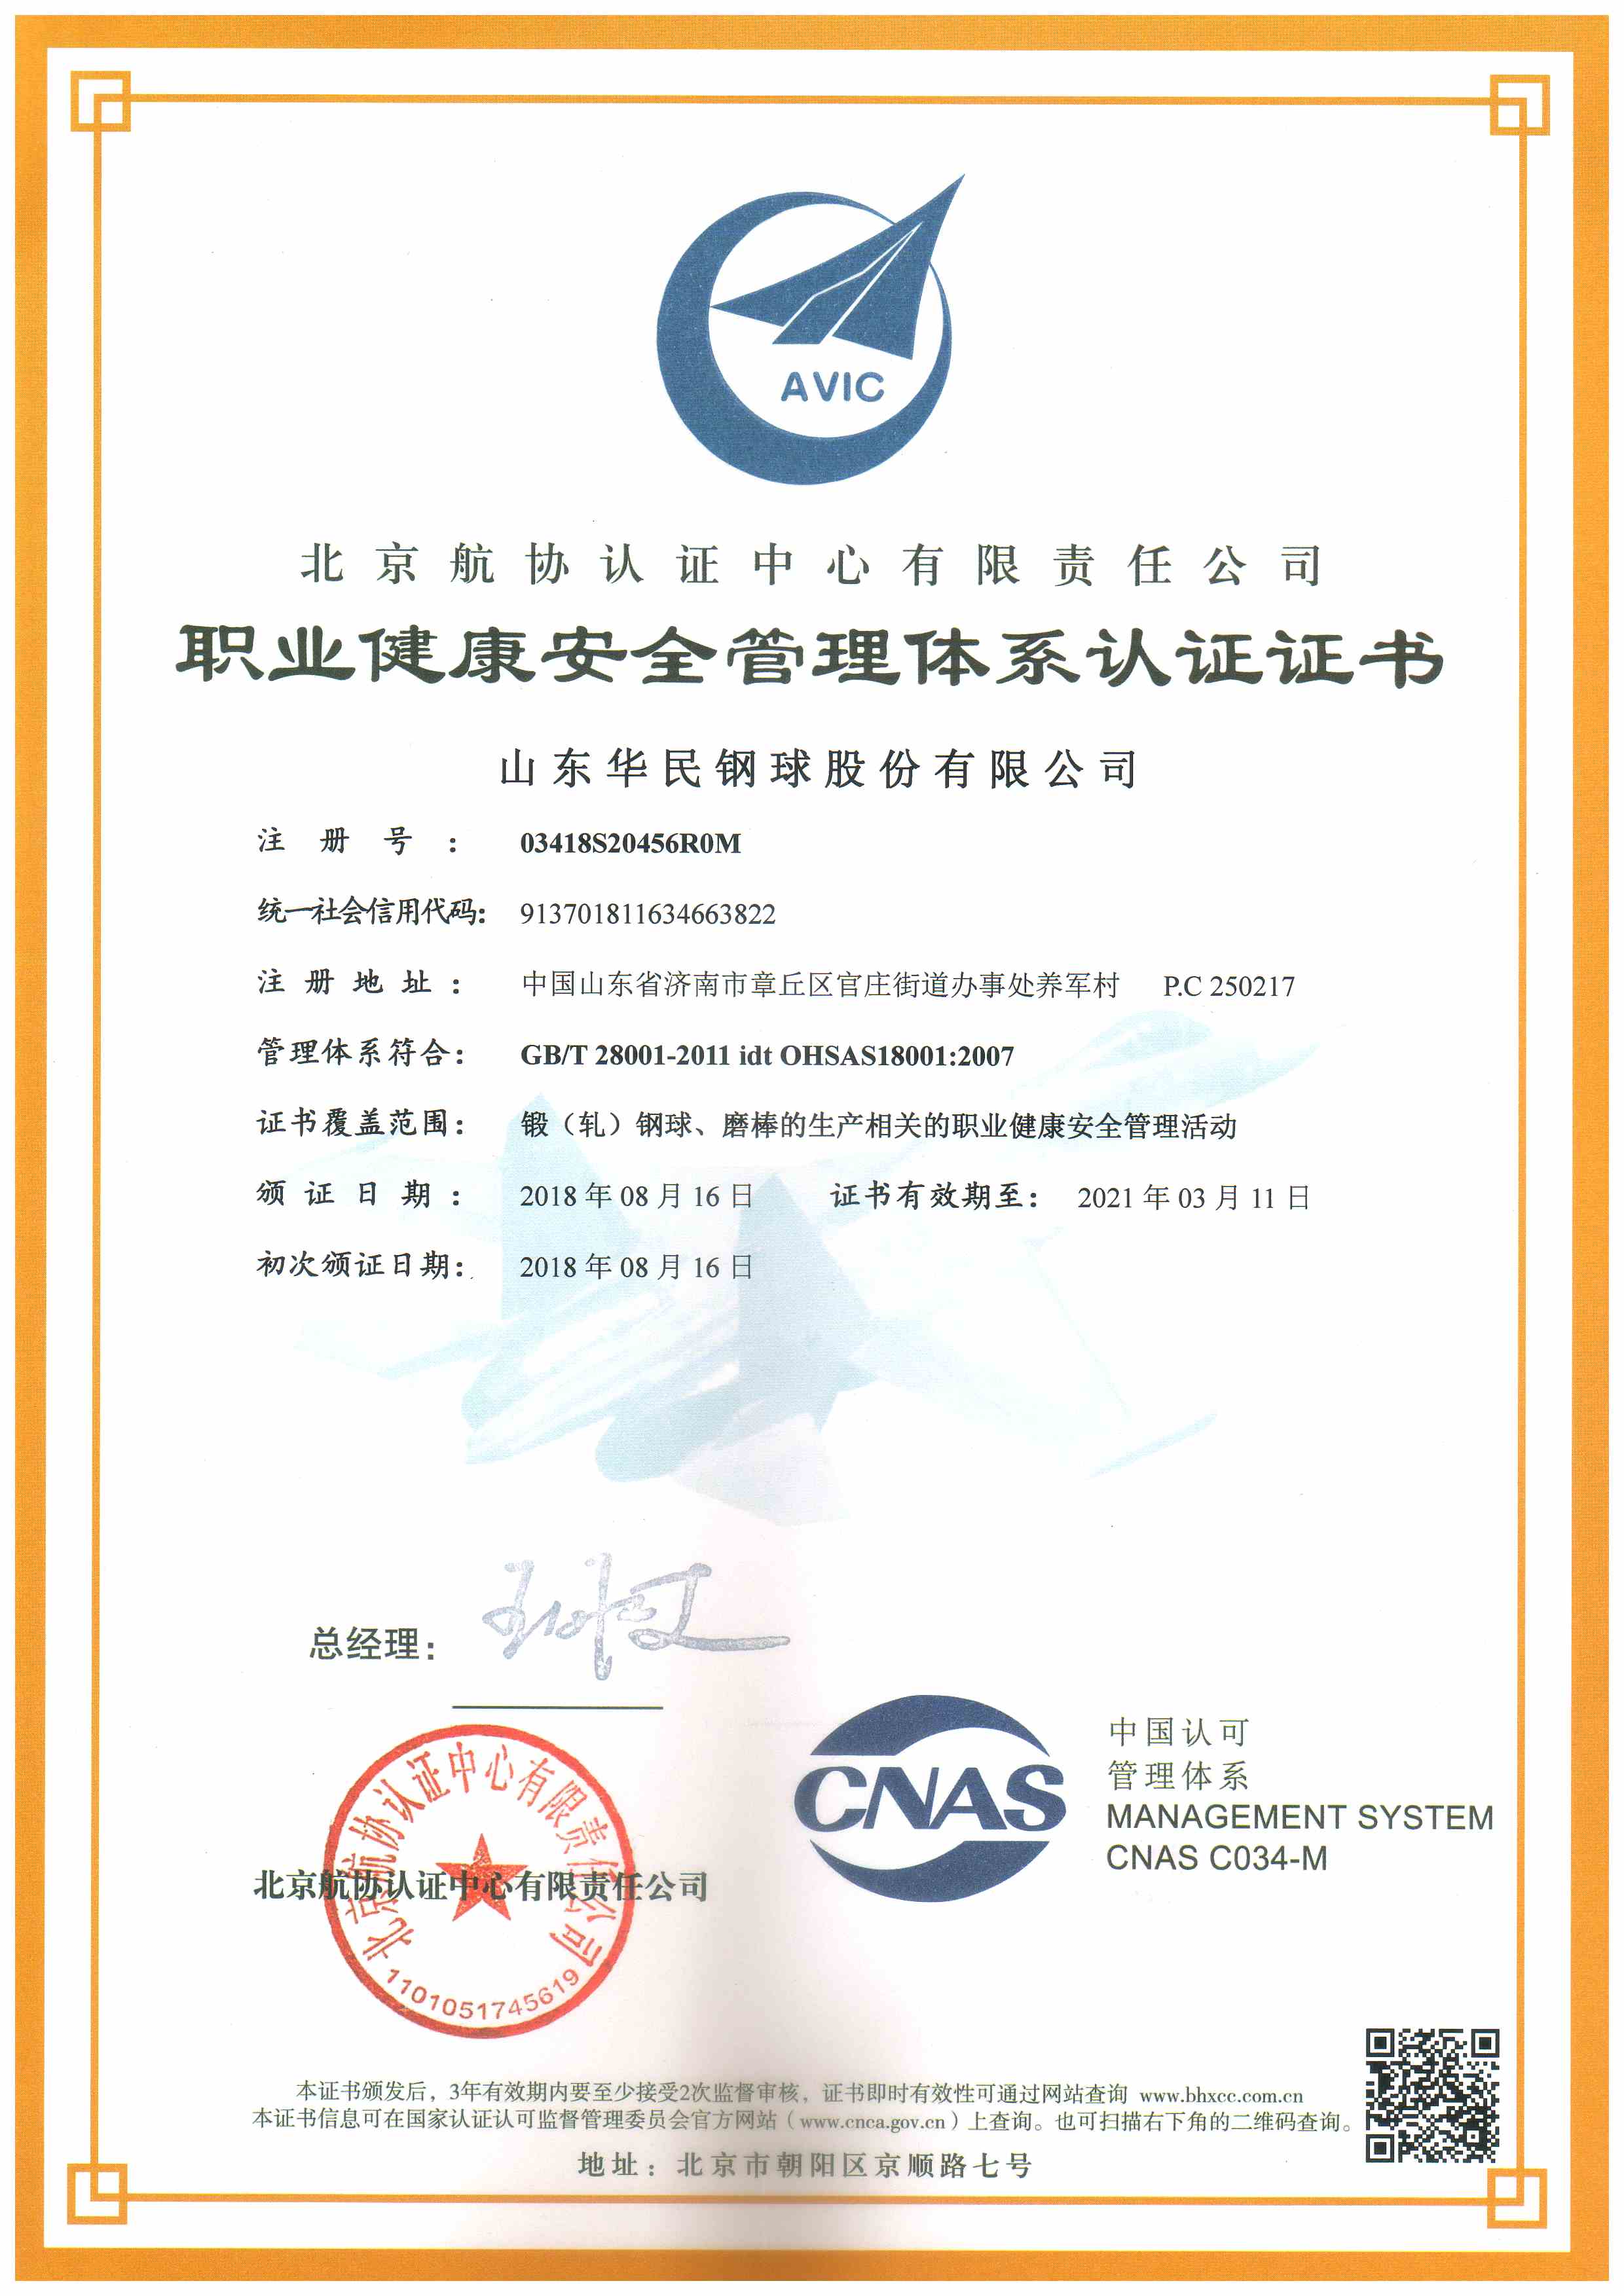 Health and safety management system certification